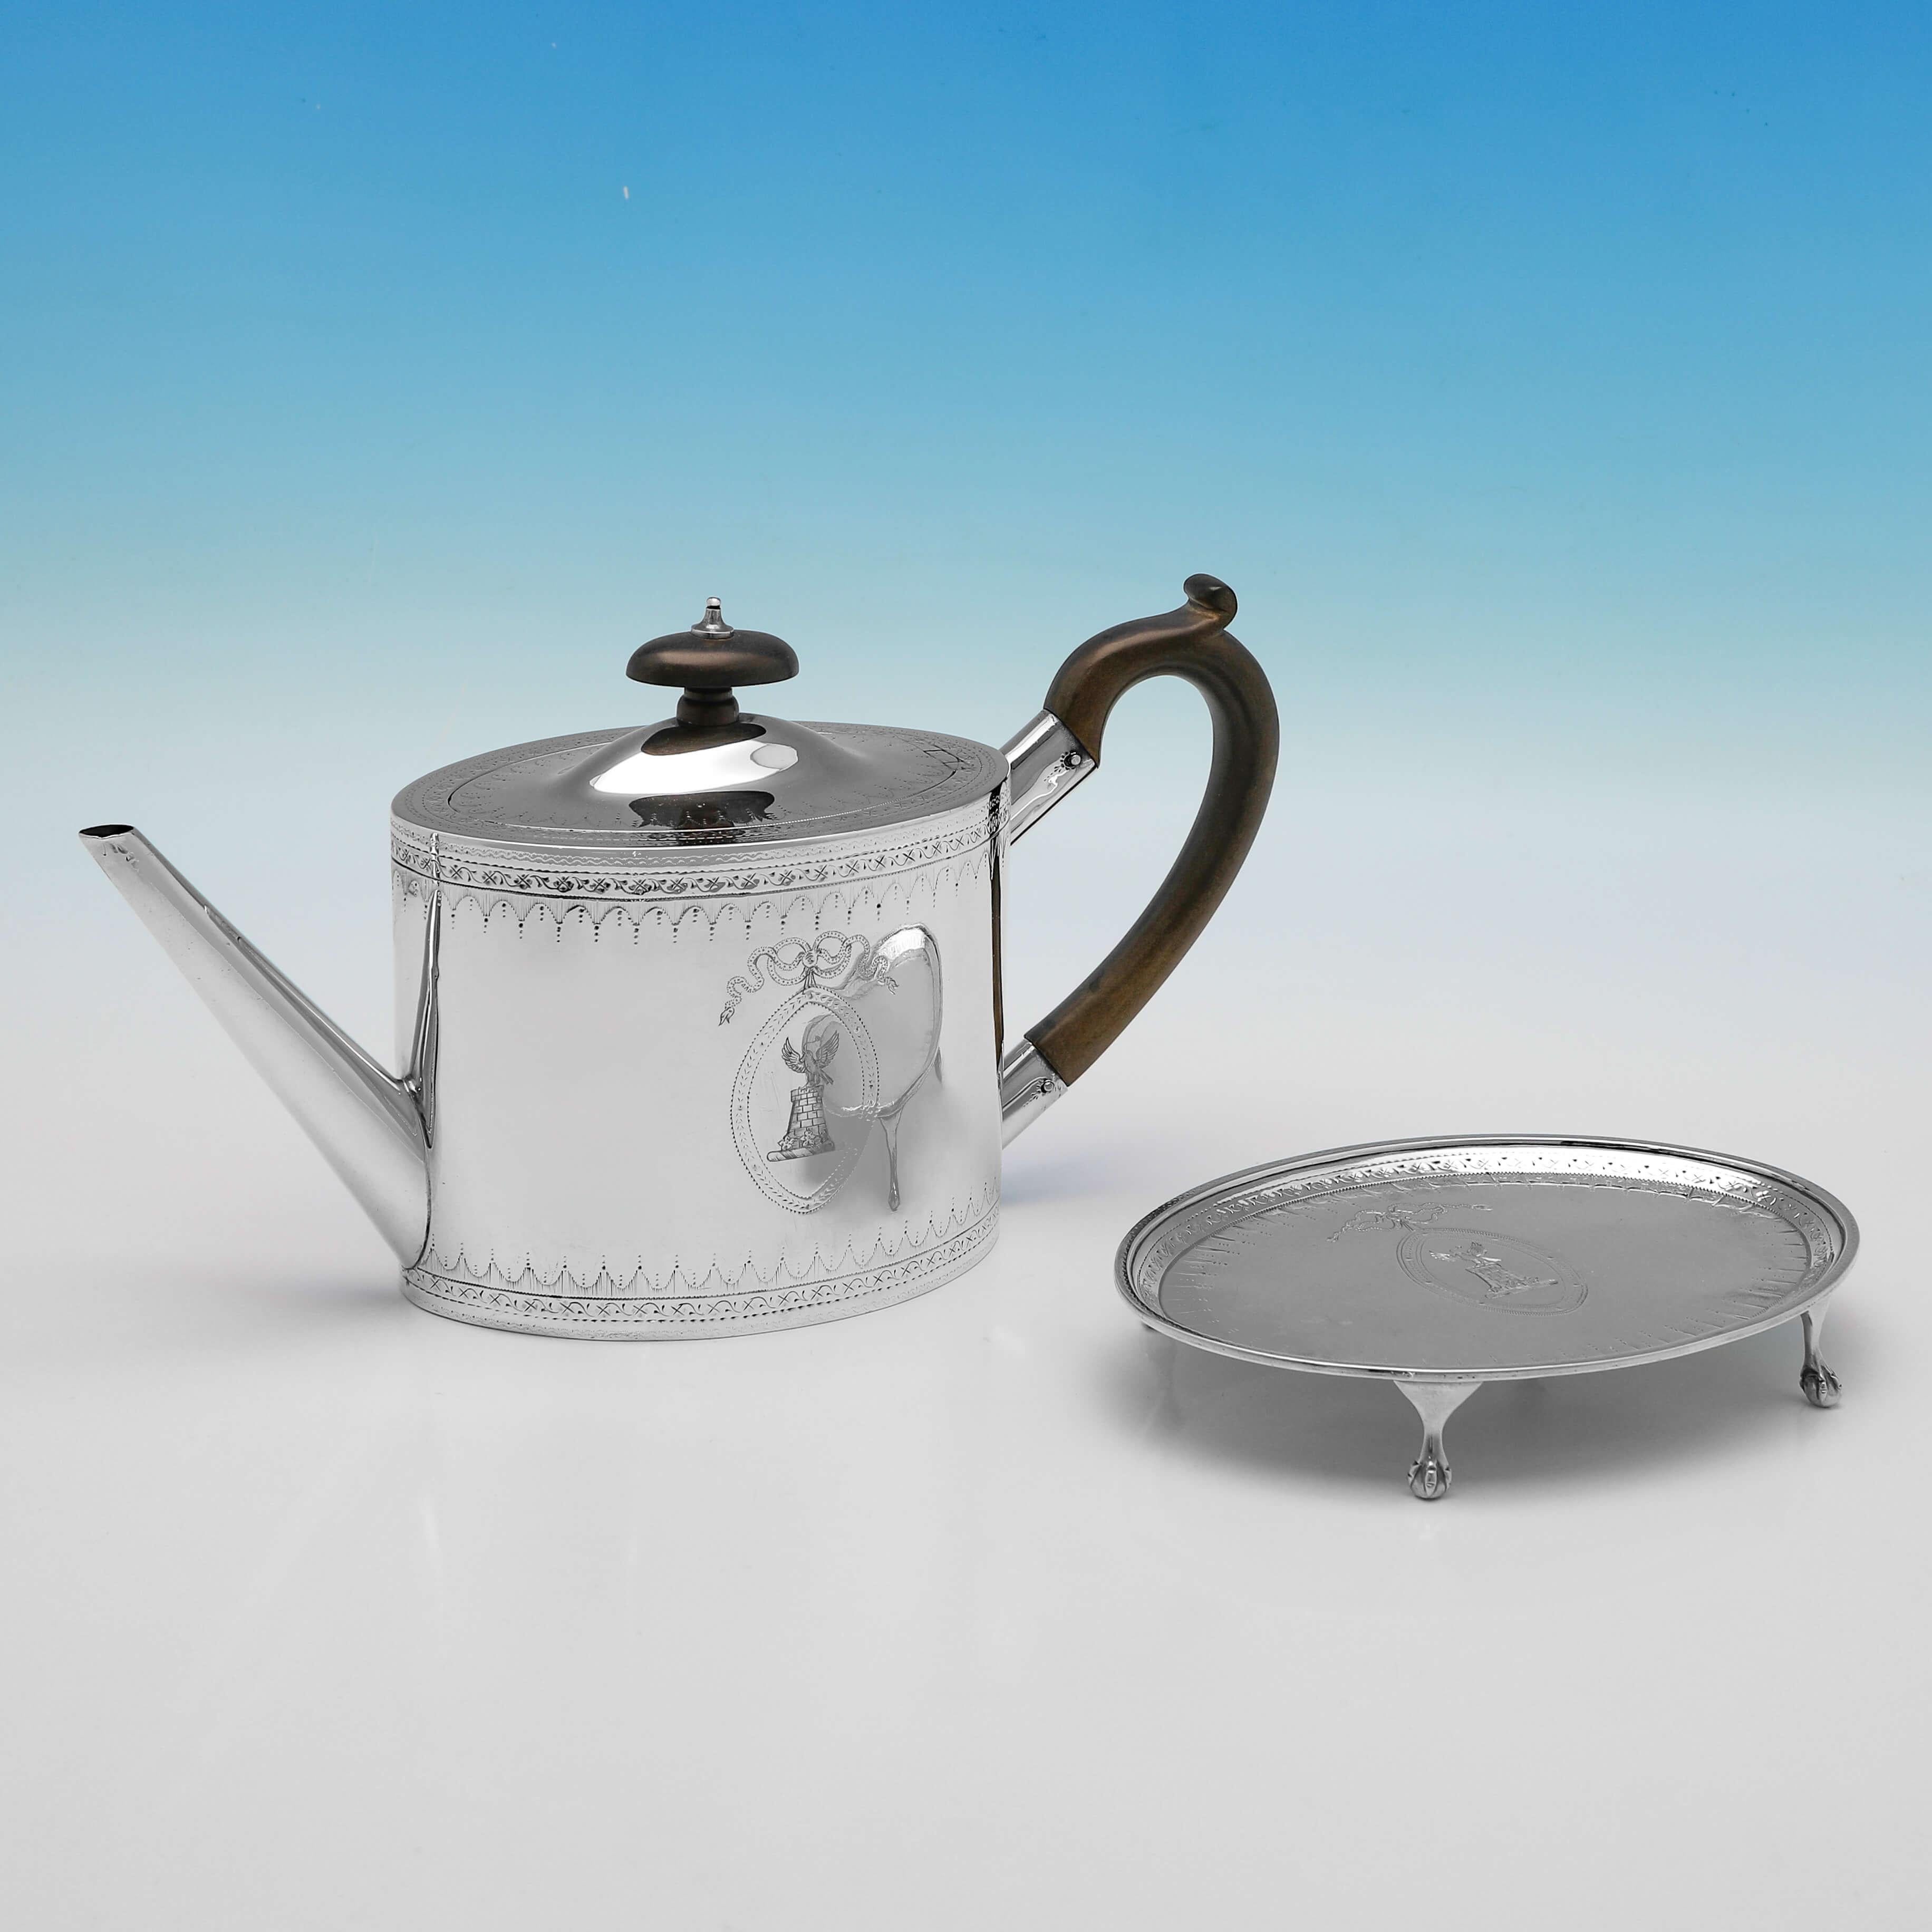 English Neoclassical 18th Century Sterling Silver Teapot On Stand - John Denziloe 1787/8 For Sale